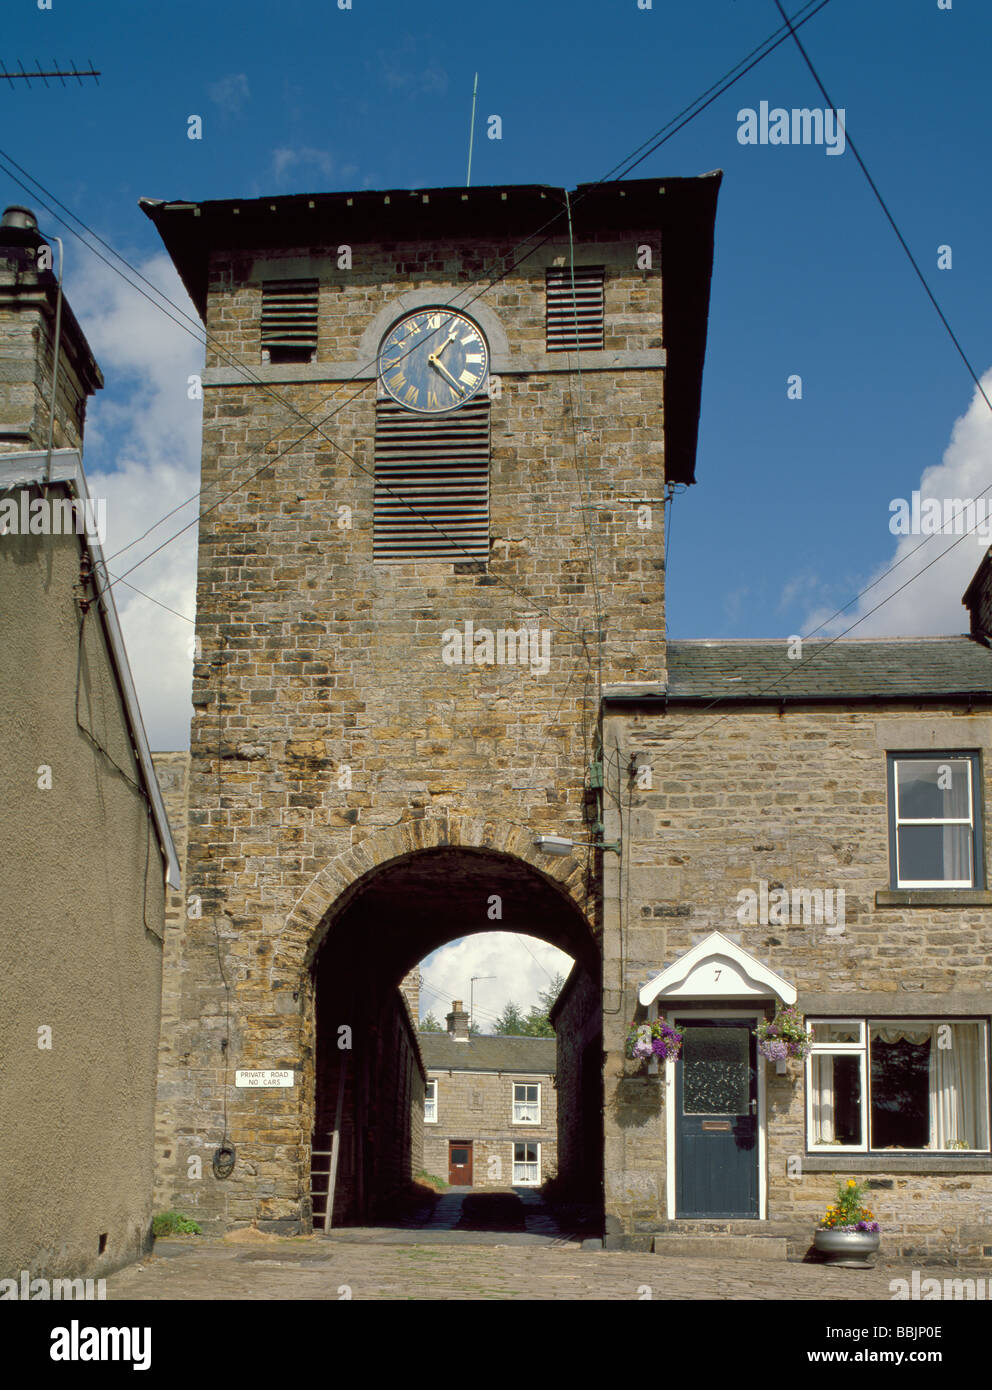 Clock Tower, Middleton-in-Teesdale, County Durham, England, UK. Stock Photo